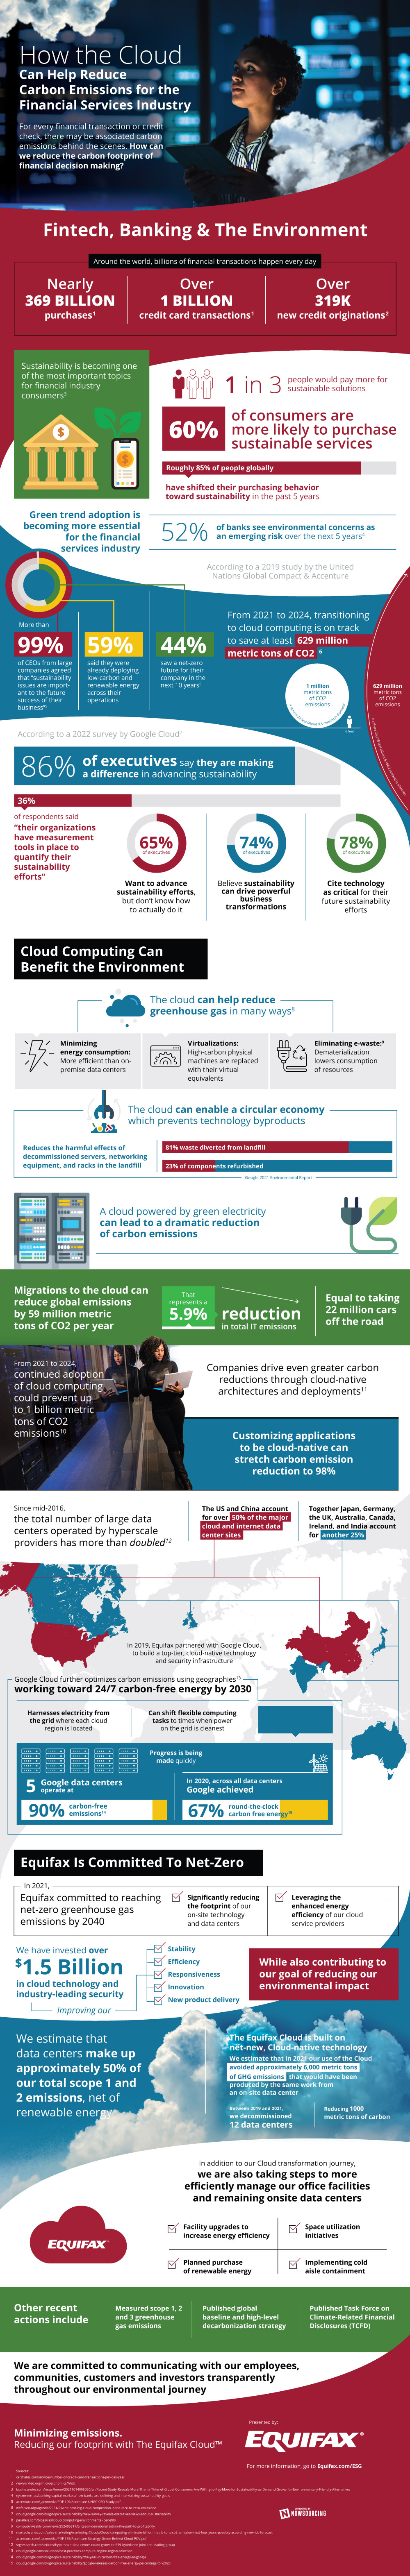 Infographic: A look at sustainability in cloud computing